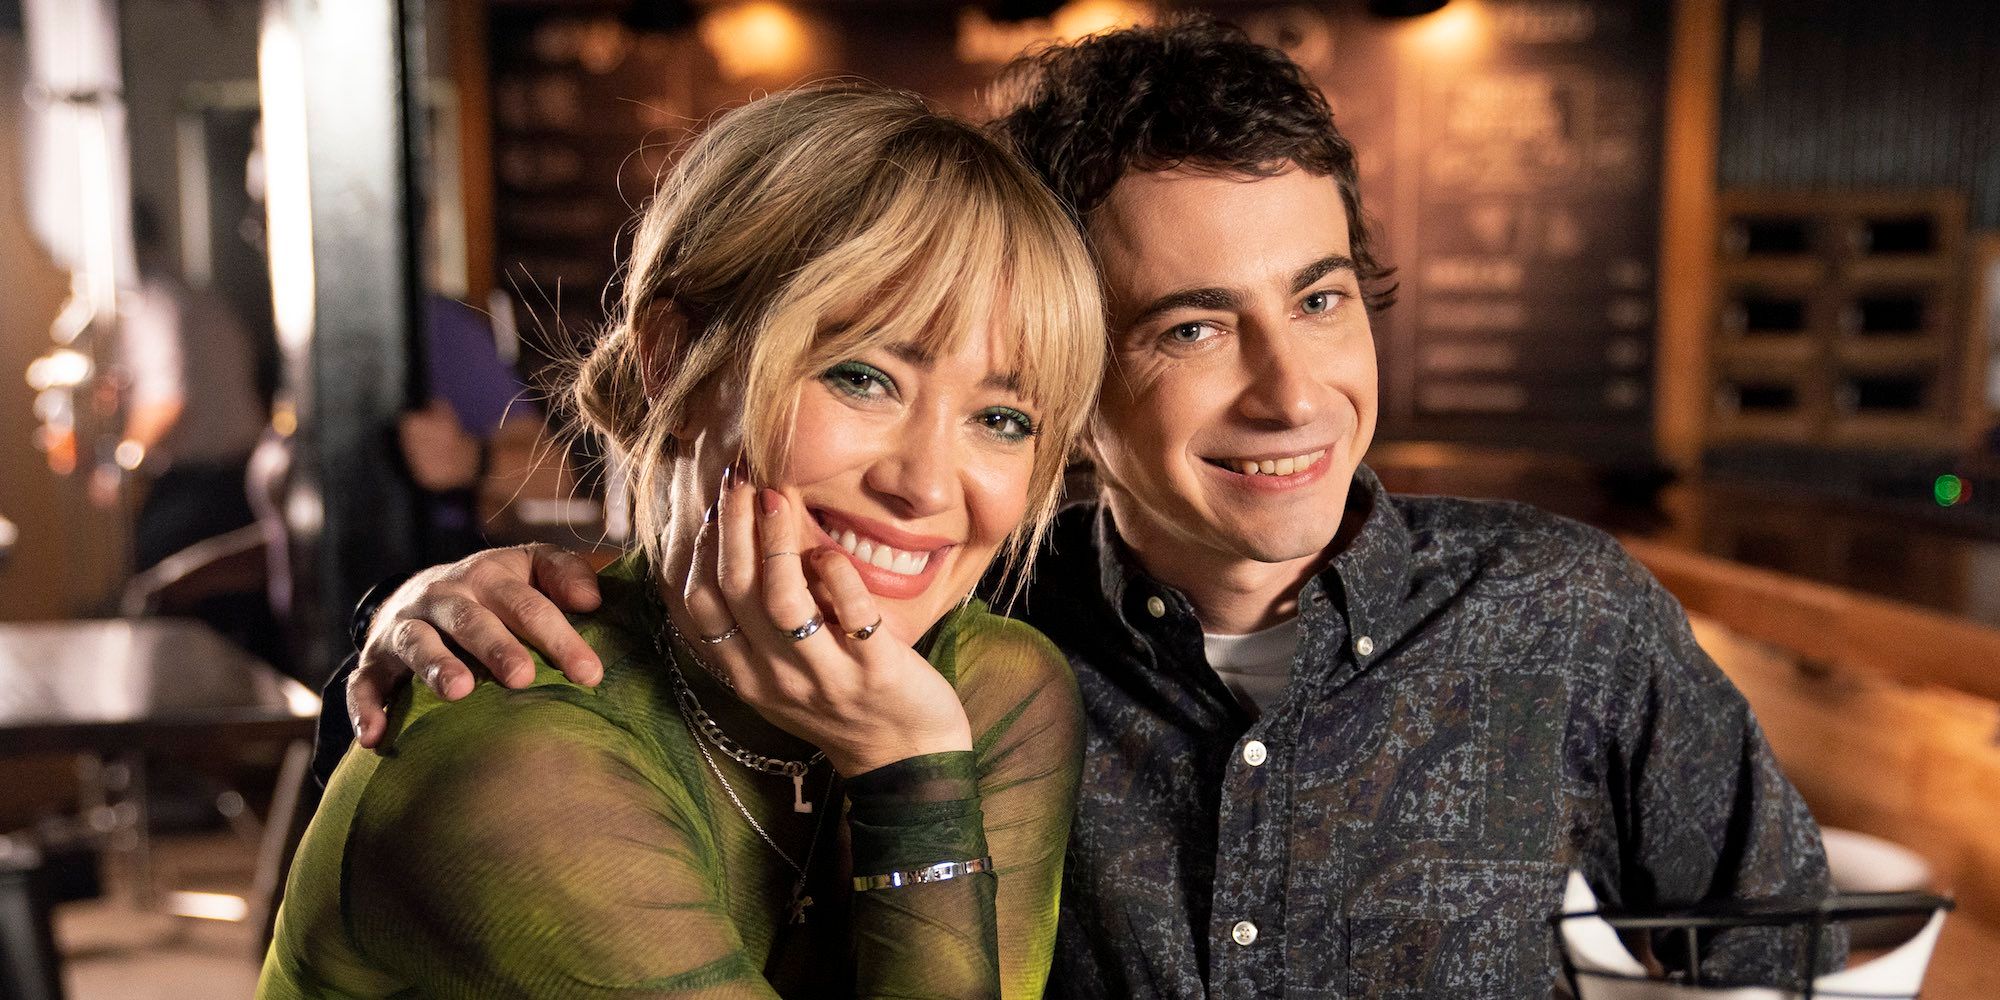 Hilary Duff and Adam Lamberg for Lizzie McGuire Disney+ revival